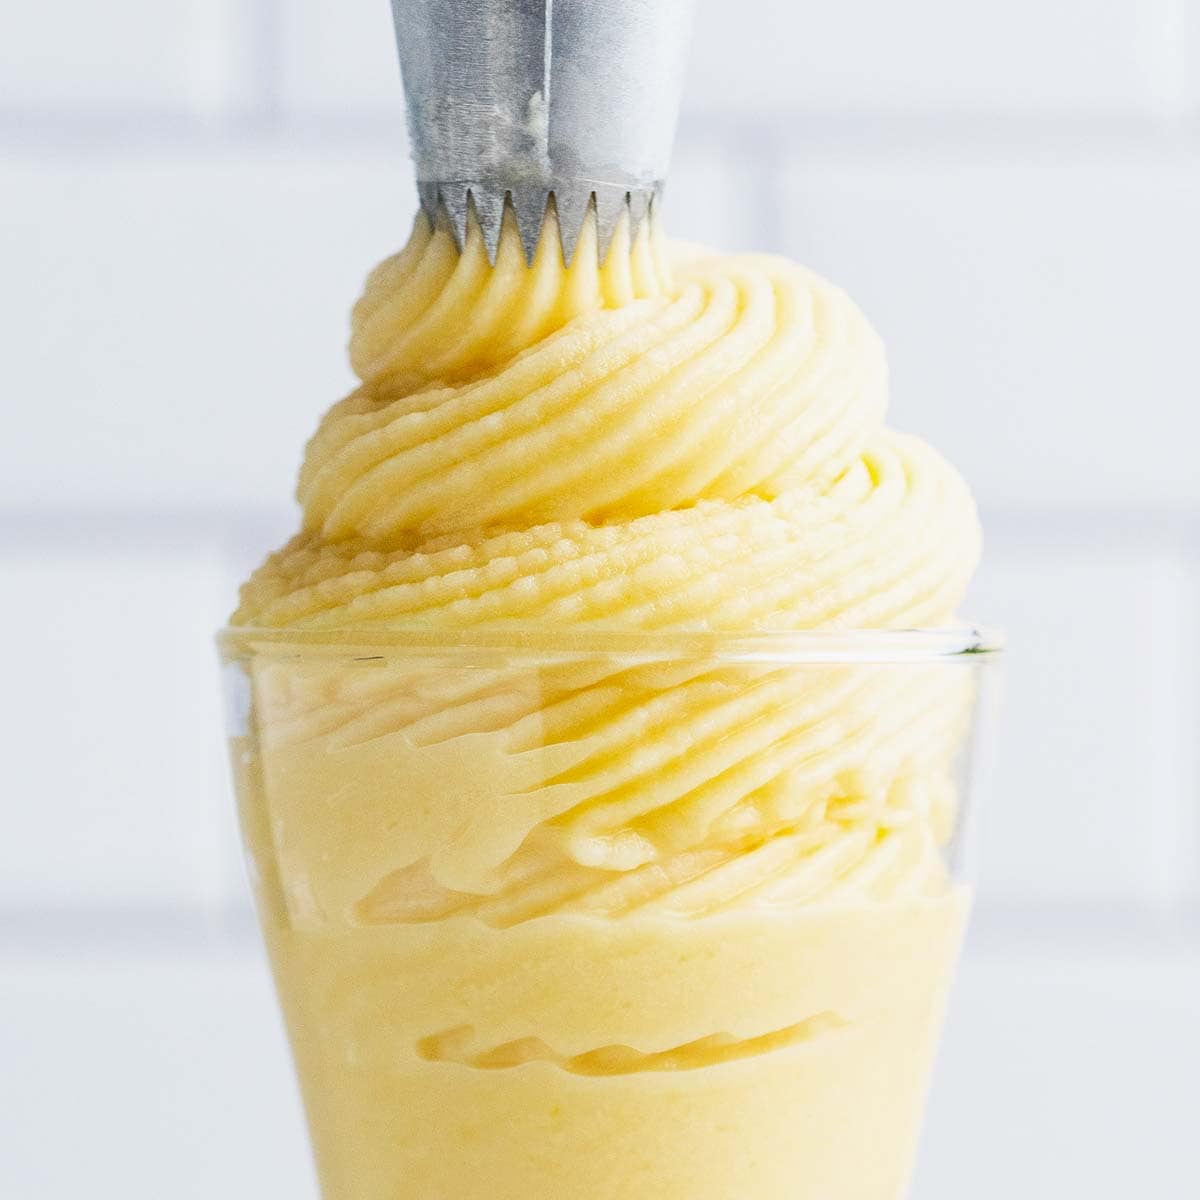 pineapple dole whip featured image